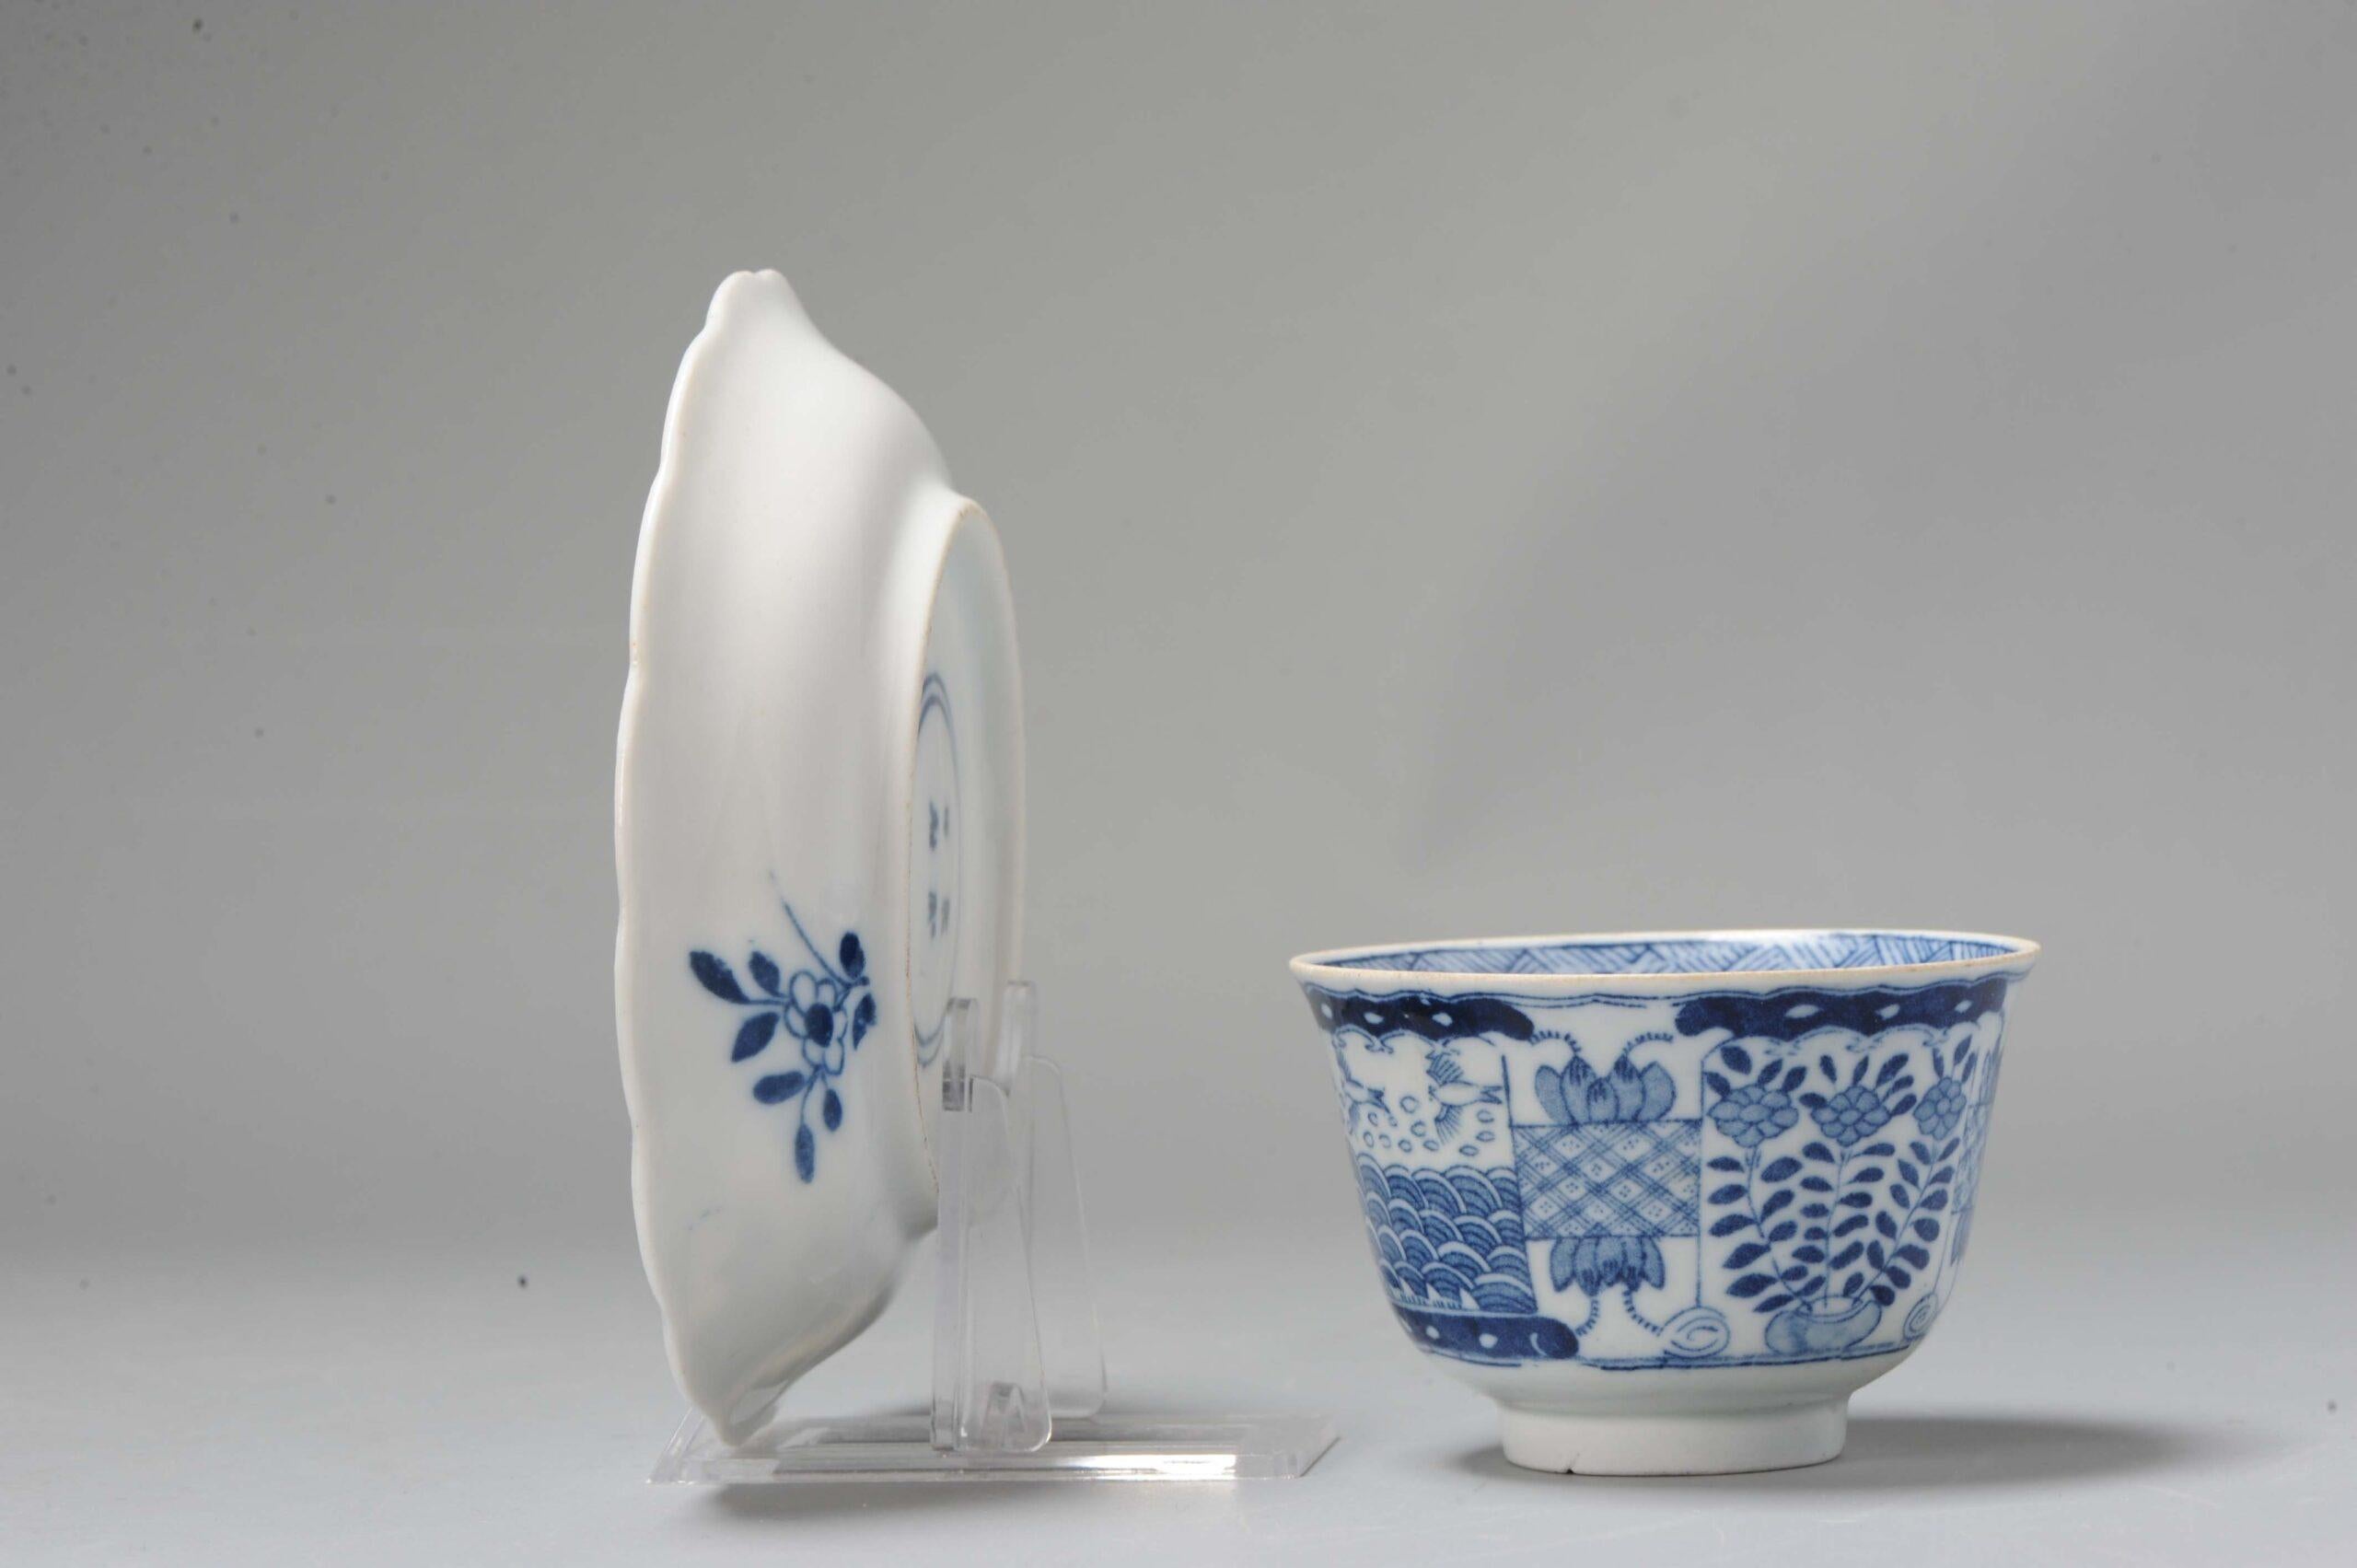 Cup and saucer. They are made in the style of the well known Kangxi period items but are of later 19th century. Kangxi marked but of later period.

Additional information:
Material: Porcelain & Pottery
Type: Plates
Color: Blue & White
Region of